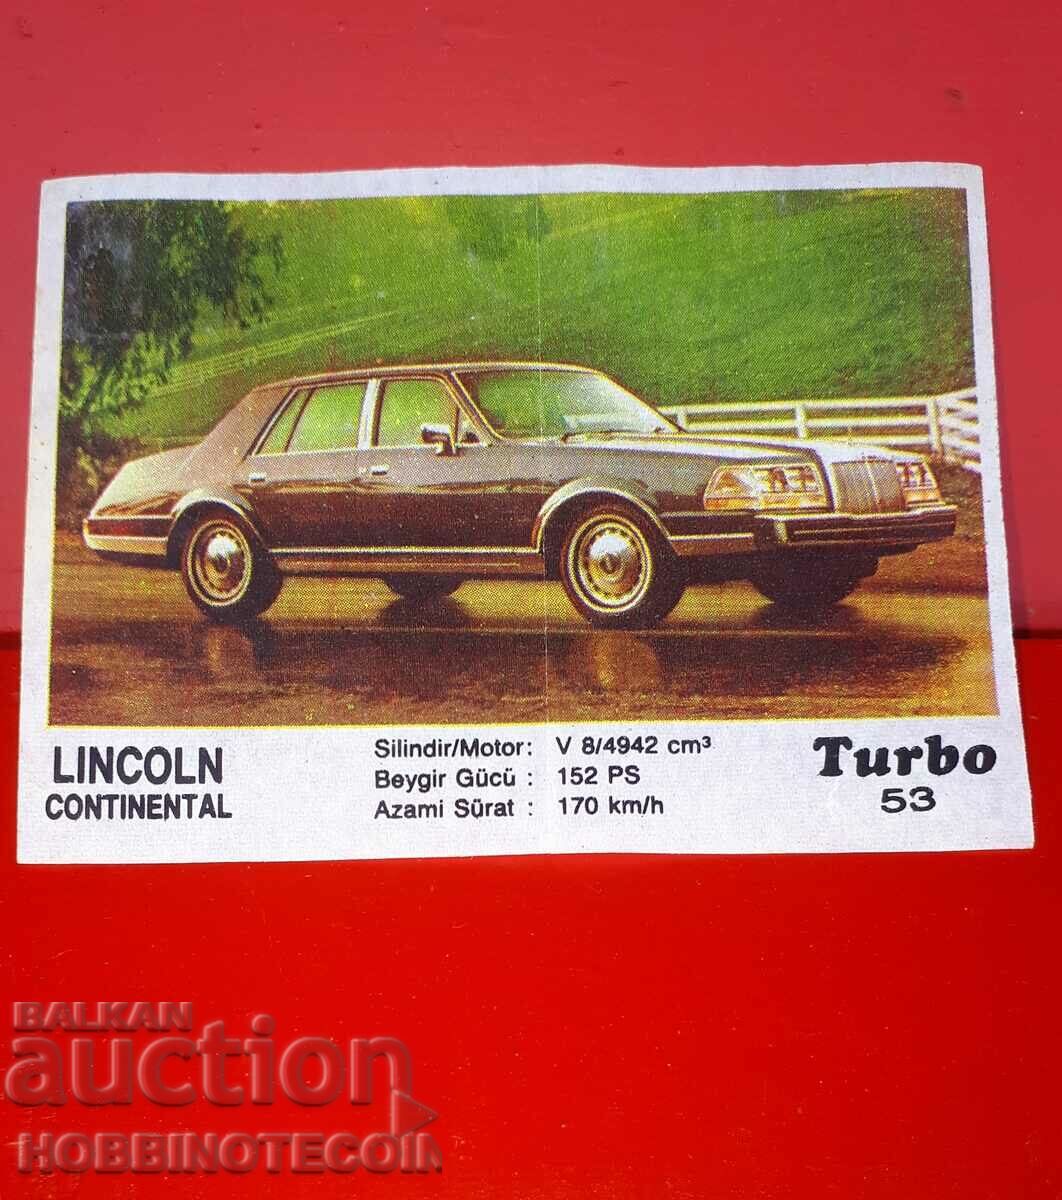 PICTURE TURBO TURBO N 53 LINCOLN CONTINENTAL